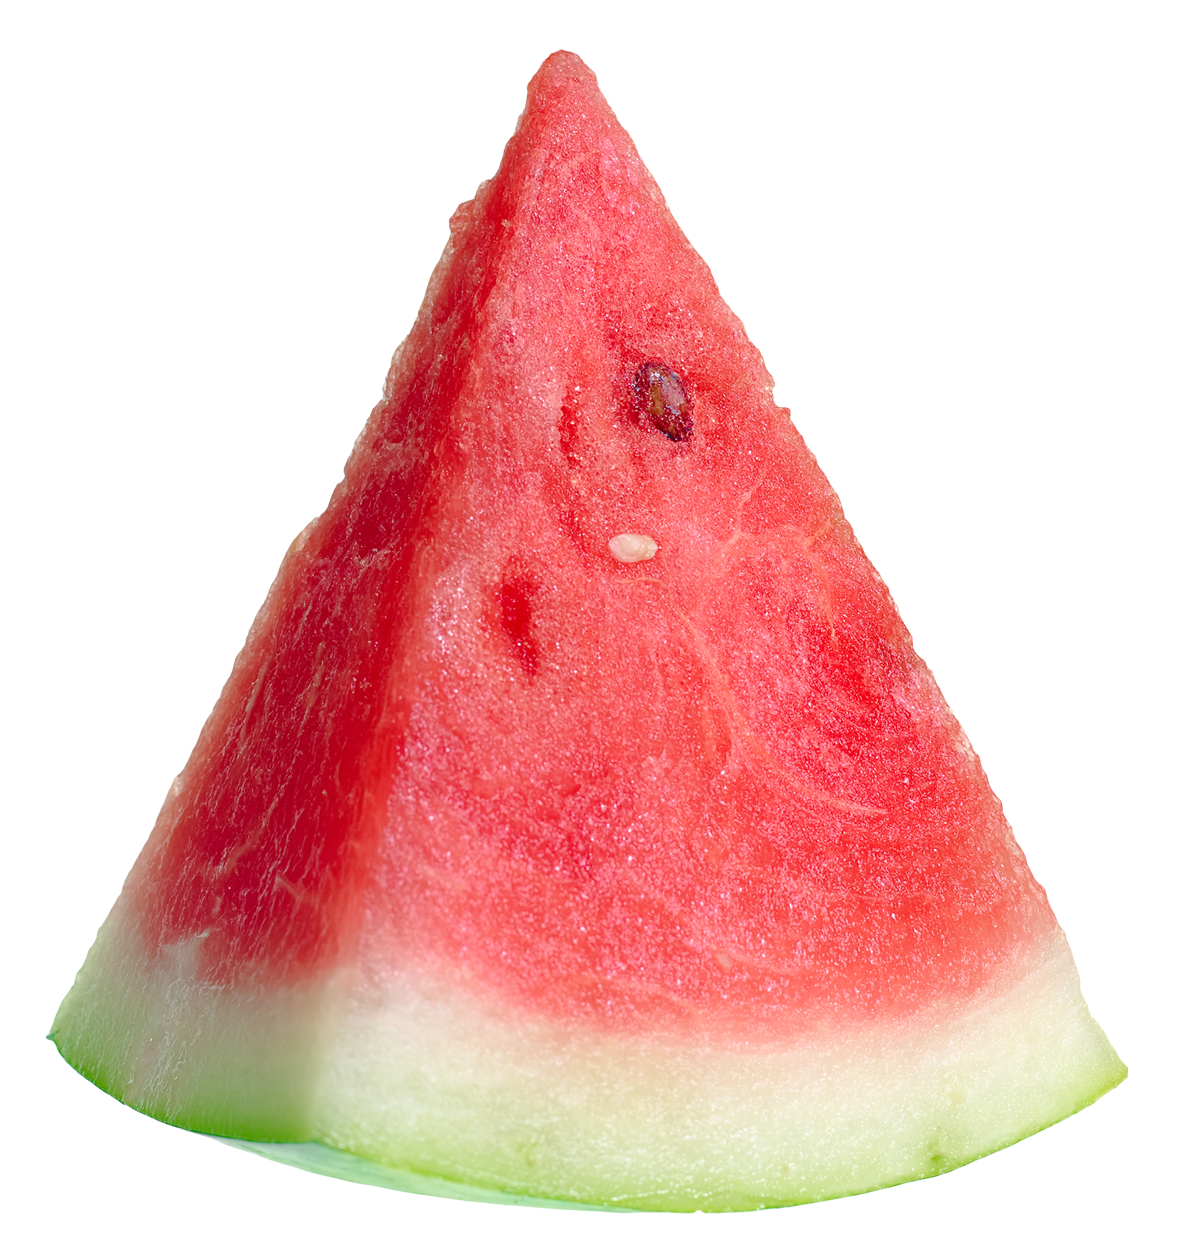 Watermelon Slice PNG Image